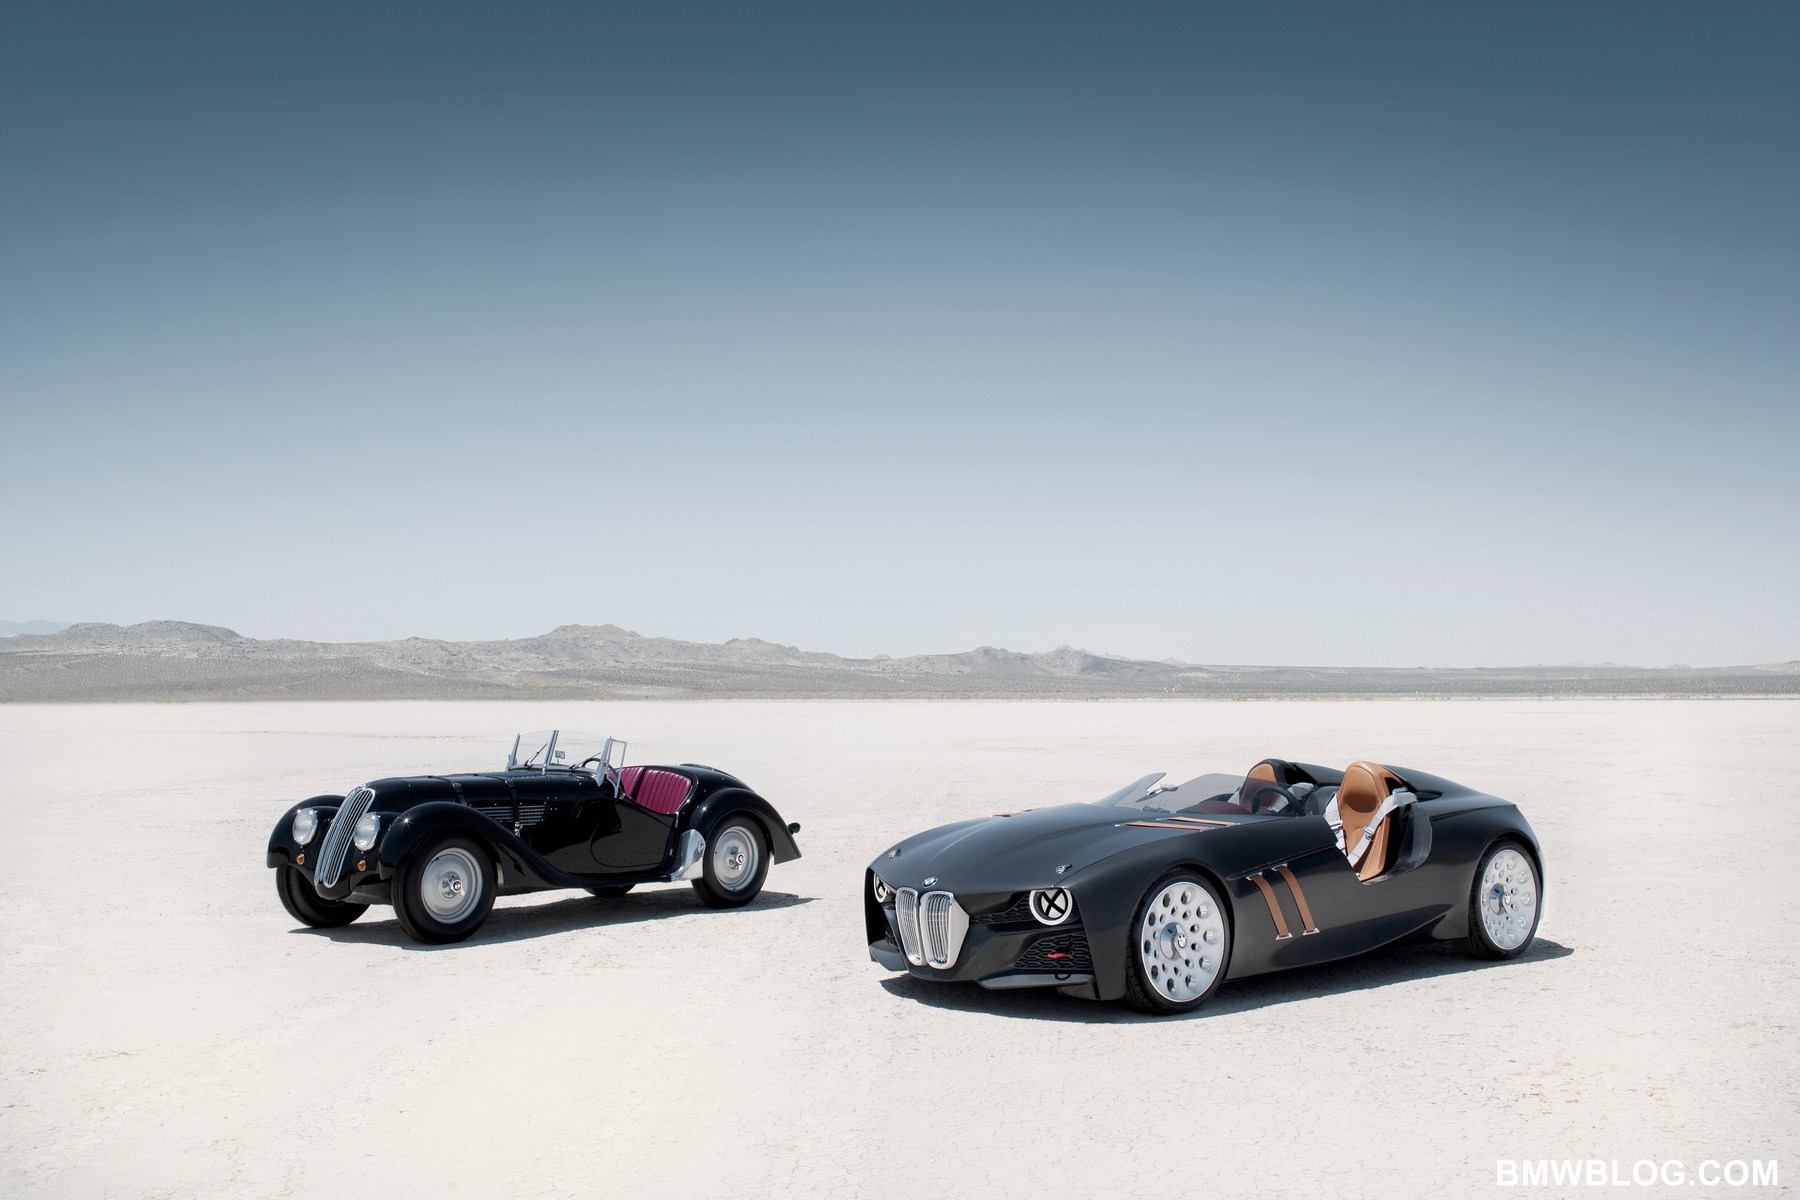 â€œWith the BMW 328 Hommage, we wish to pay homage to the passion and